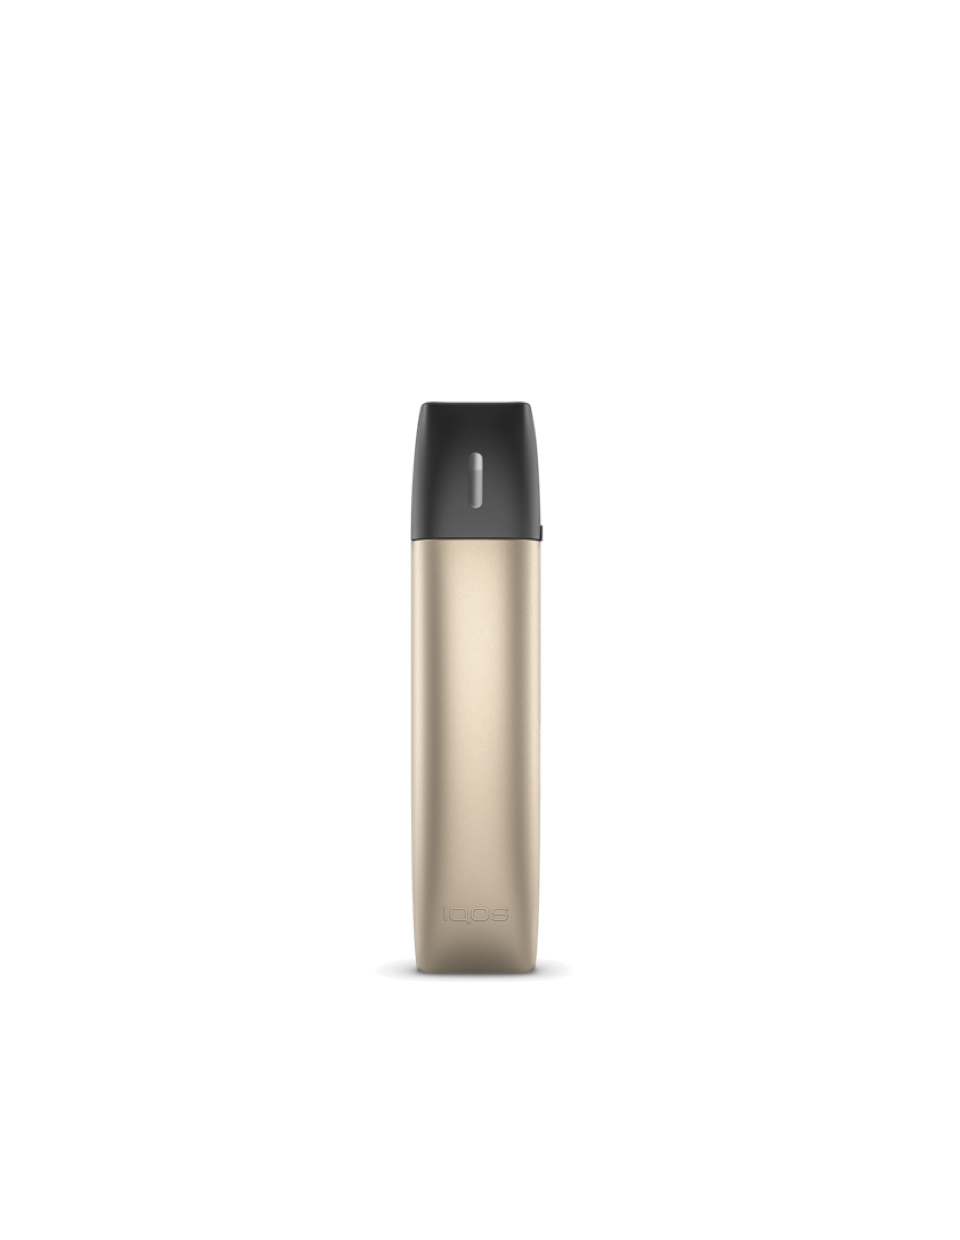 A brilliant gold IQOS VEEV device.